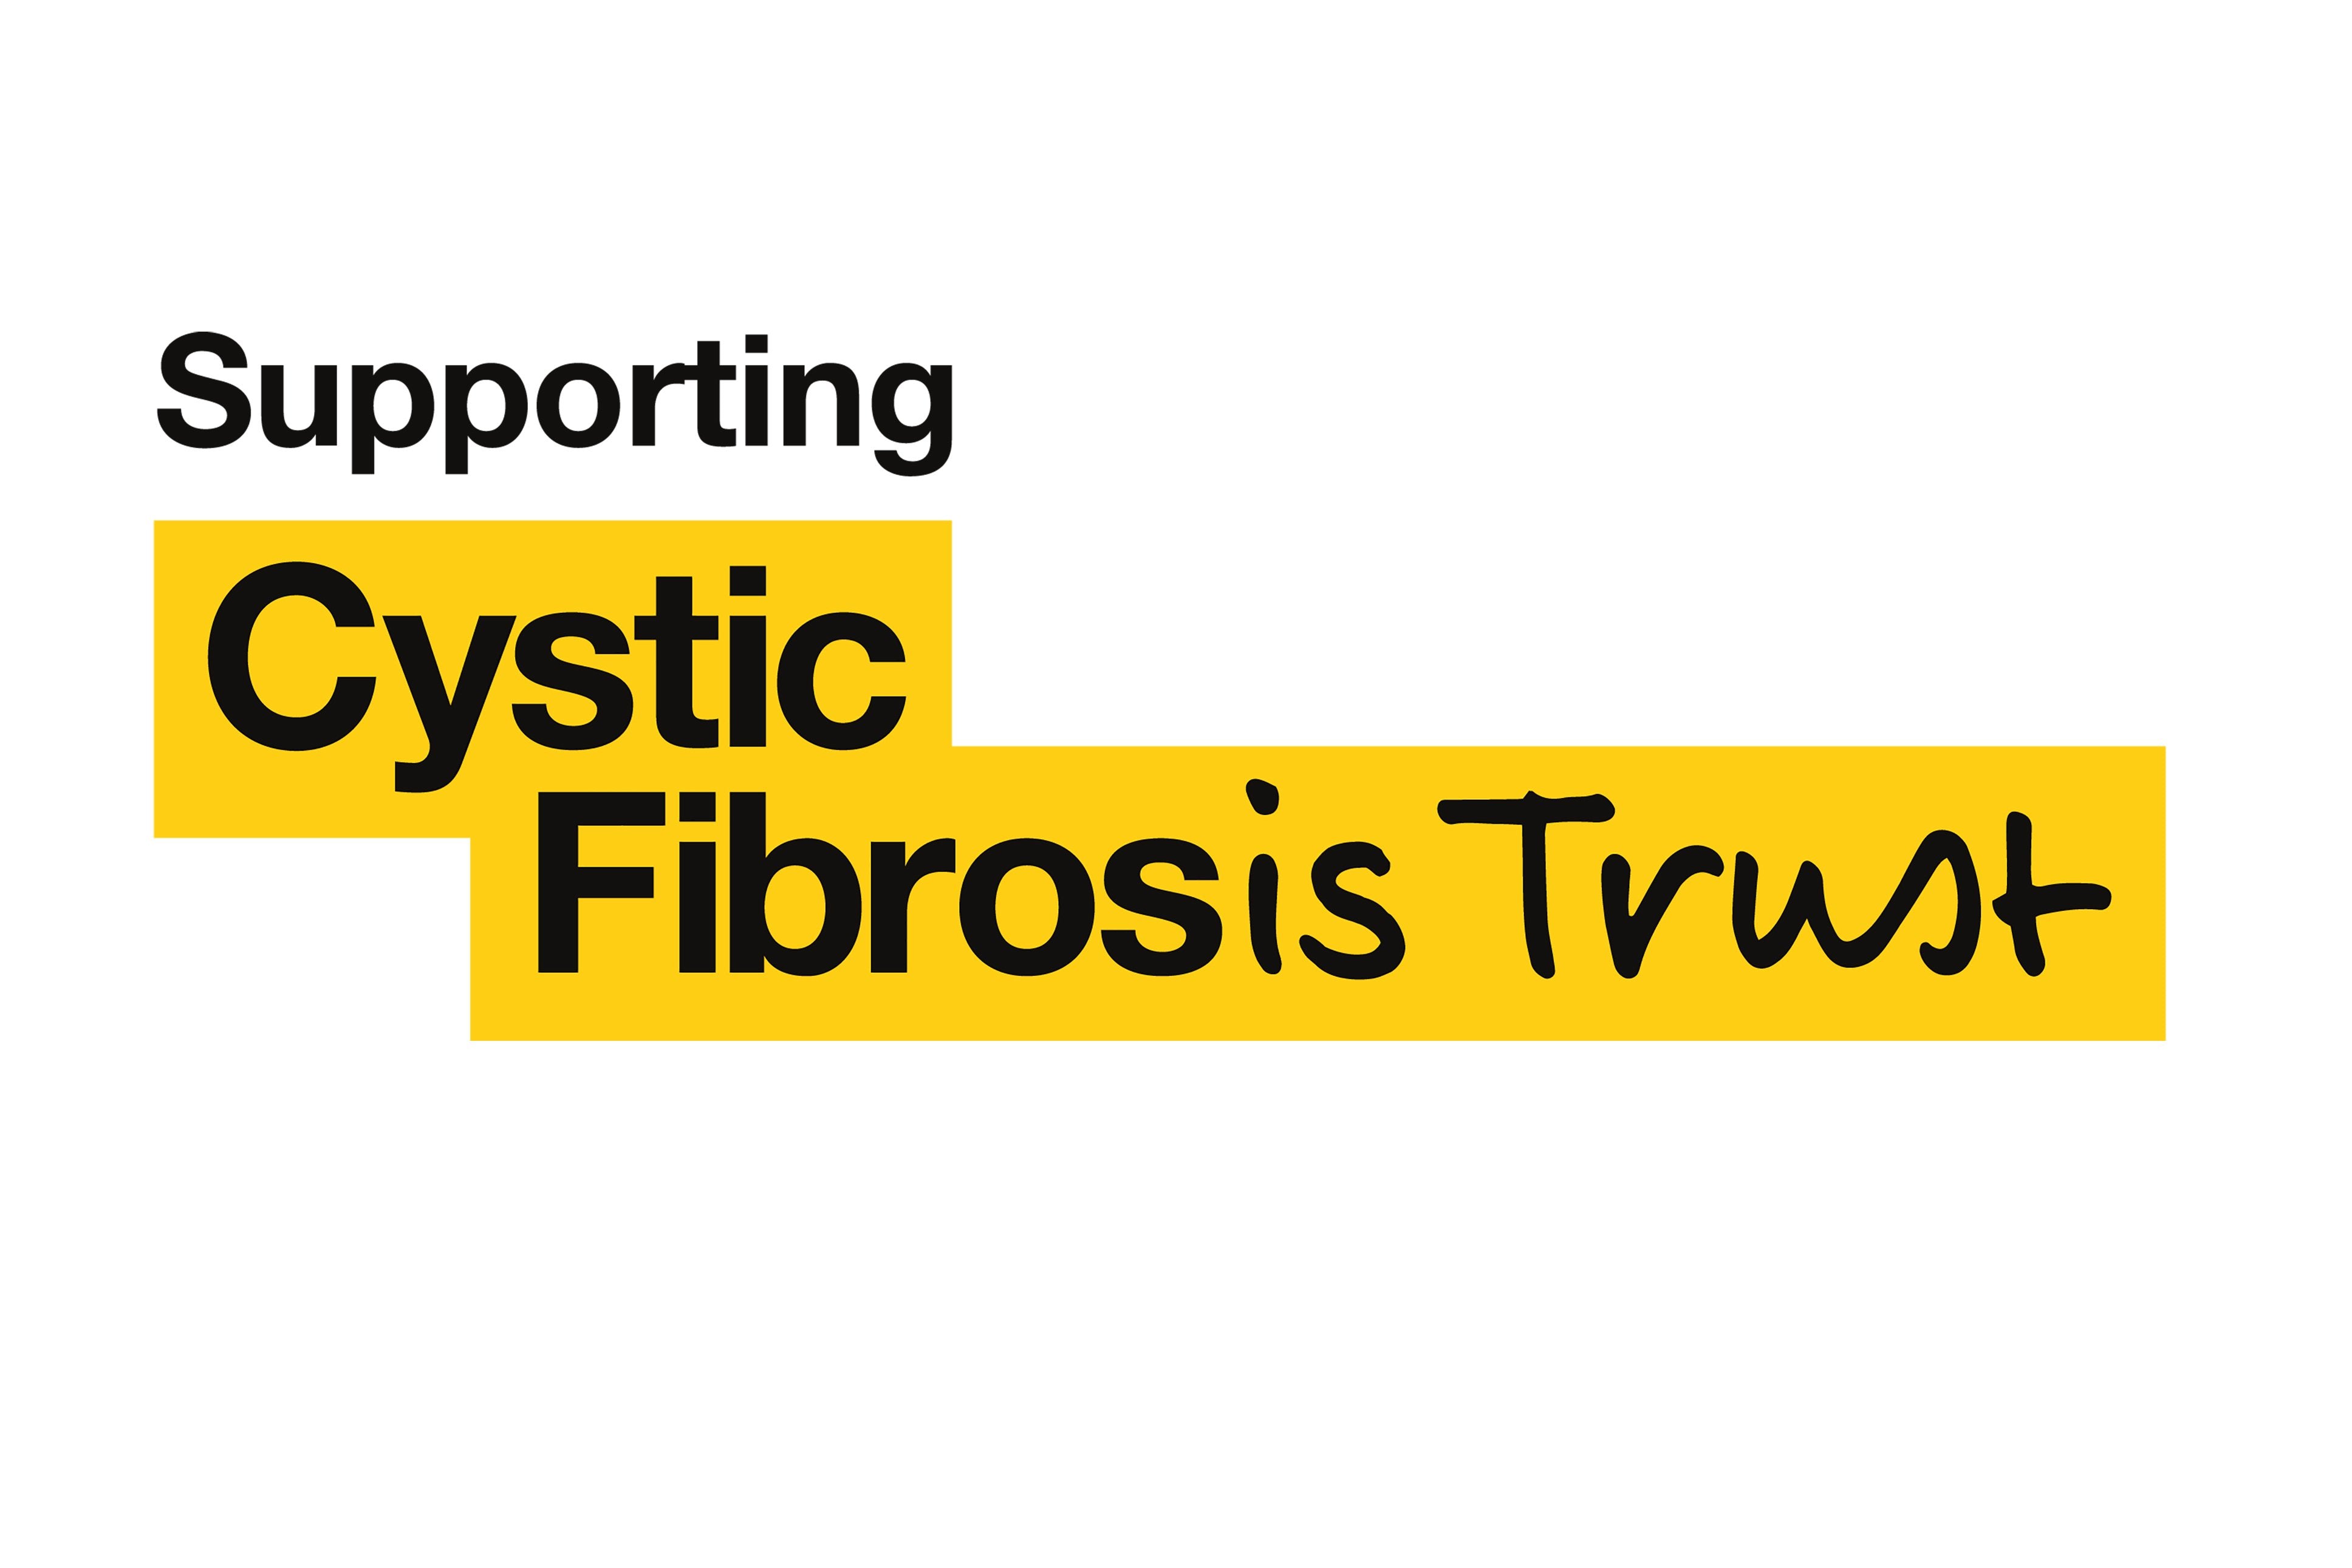 The Cystic Fibrosis Trust Charity Bracelet